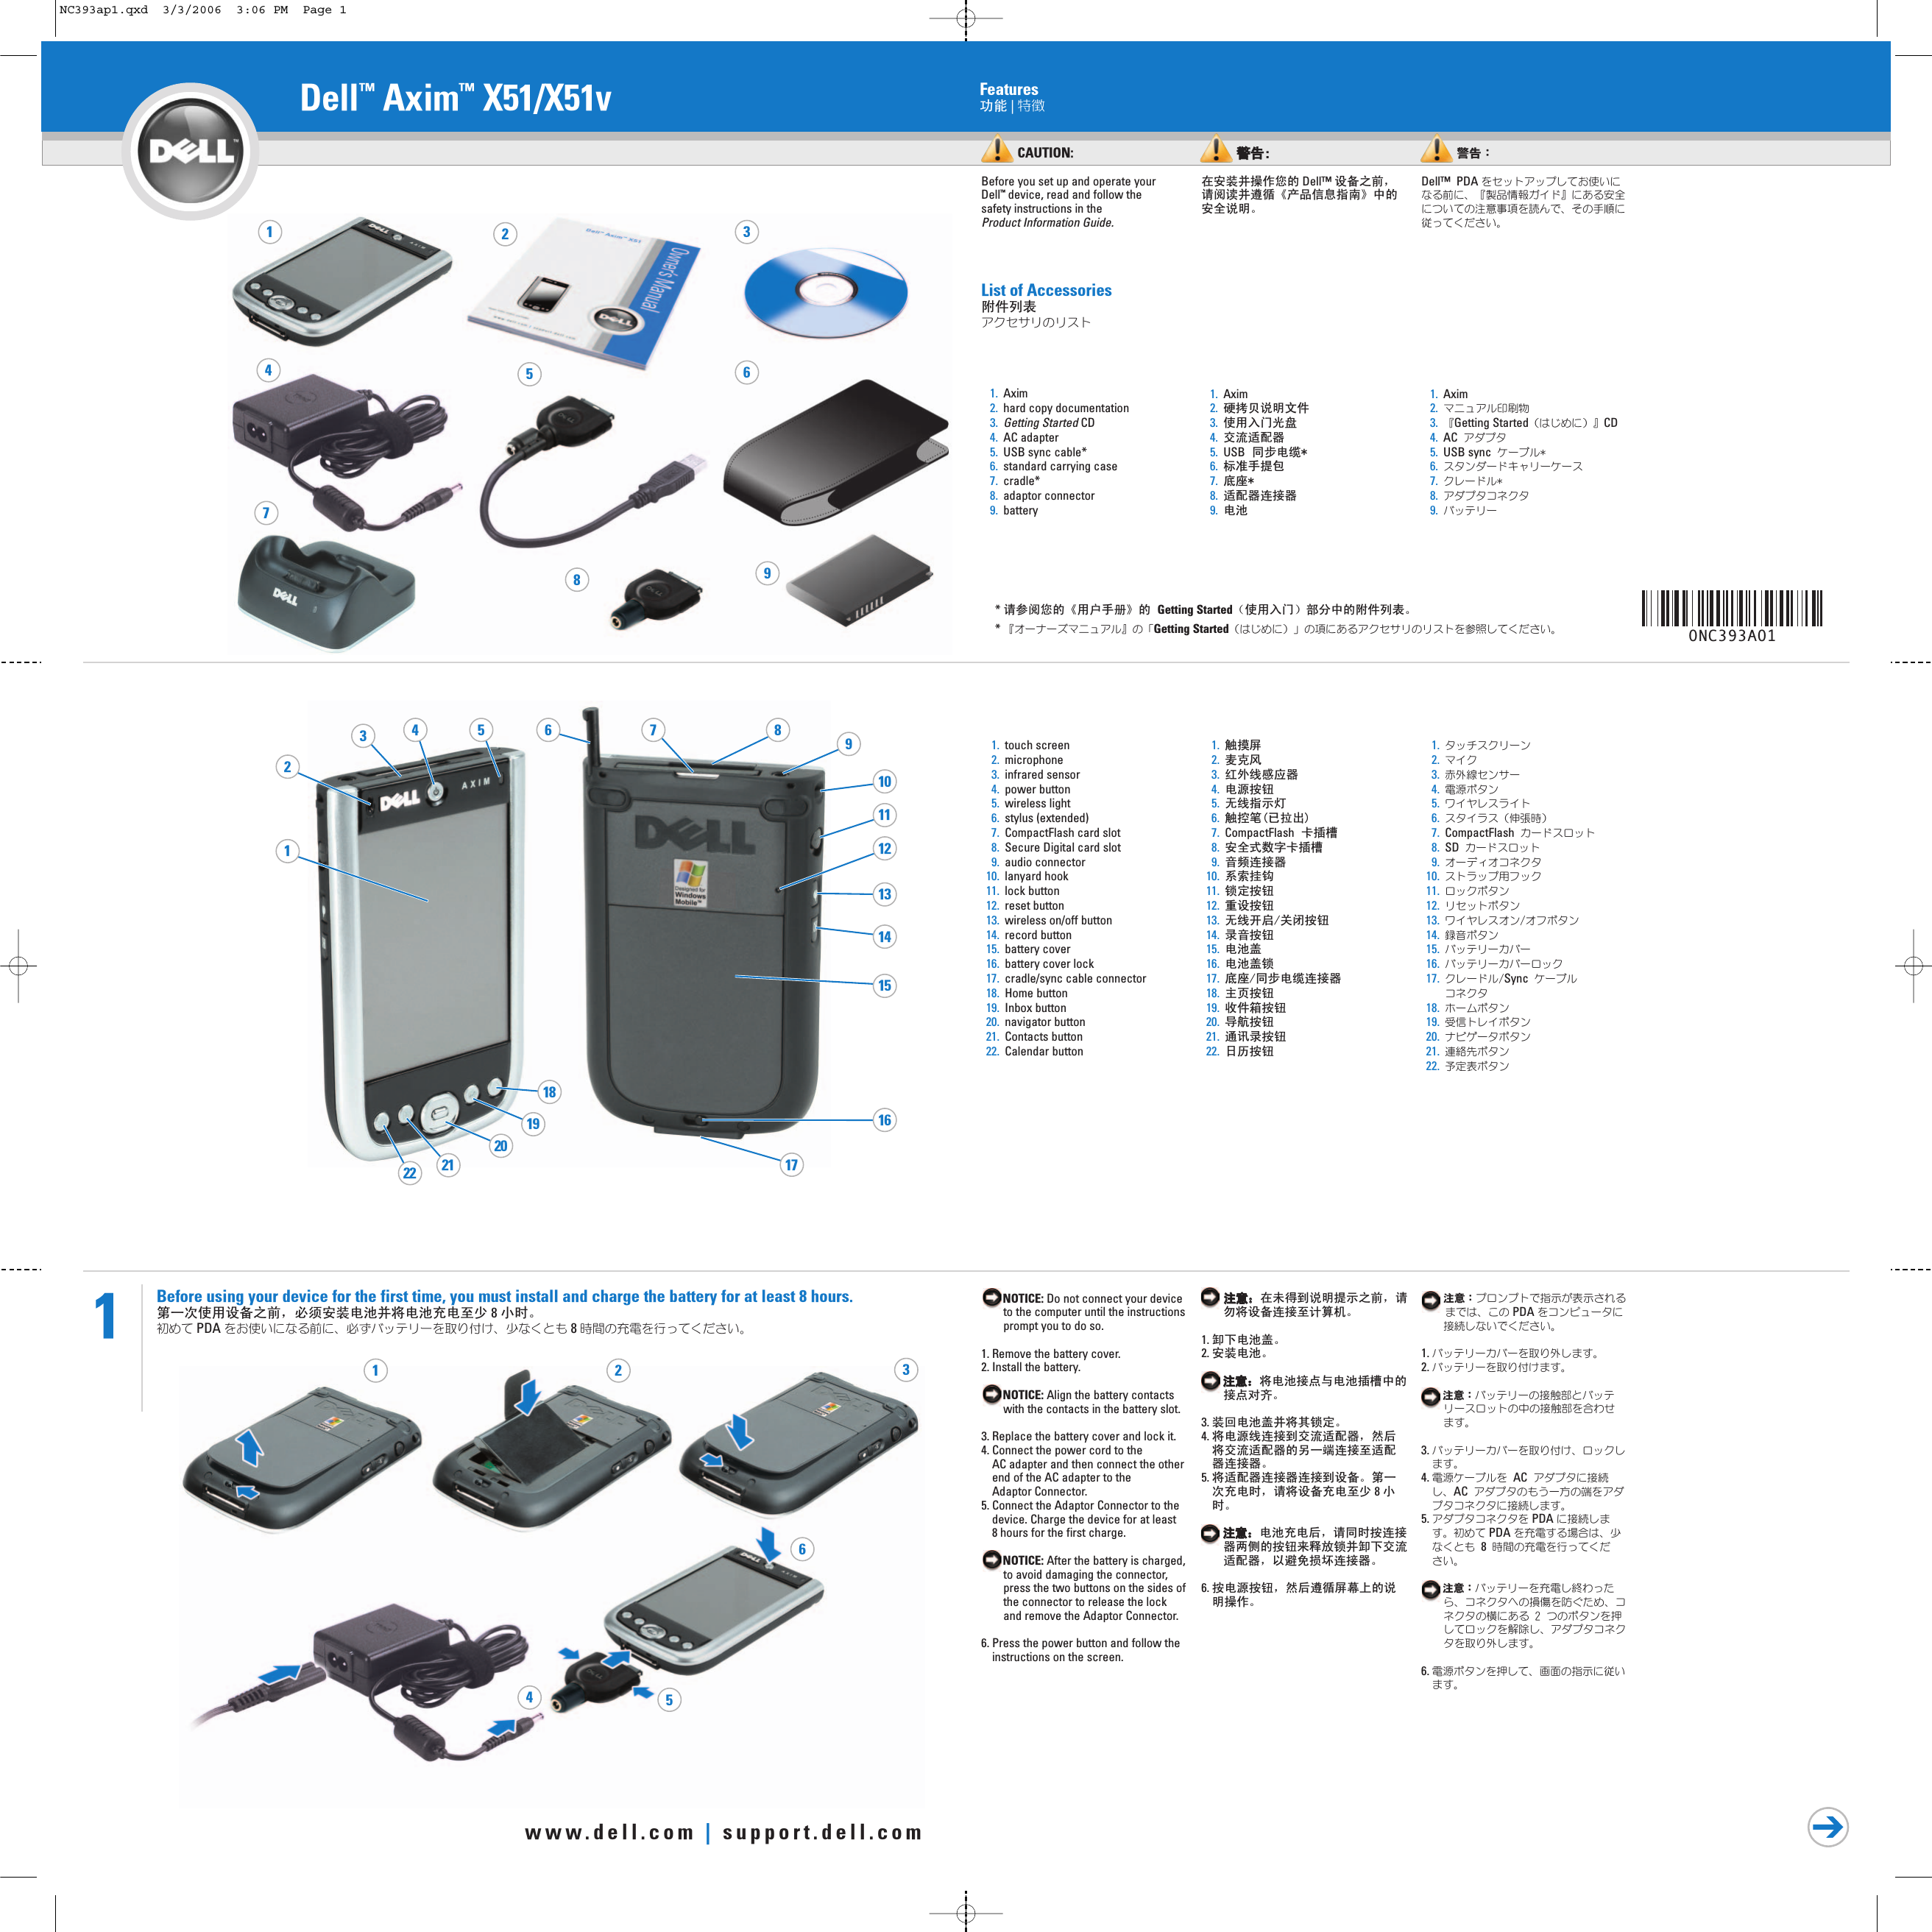 Page 1 of 2 - Dell Dell-axim-x51 Axim X51 Setup Diagram User Manual  - Guide En-us